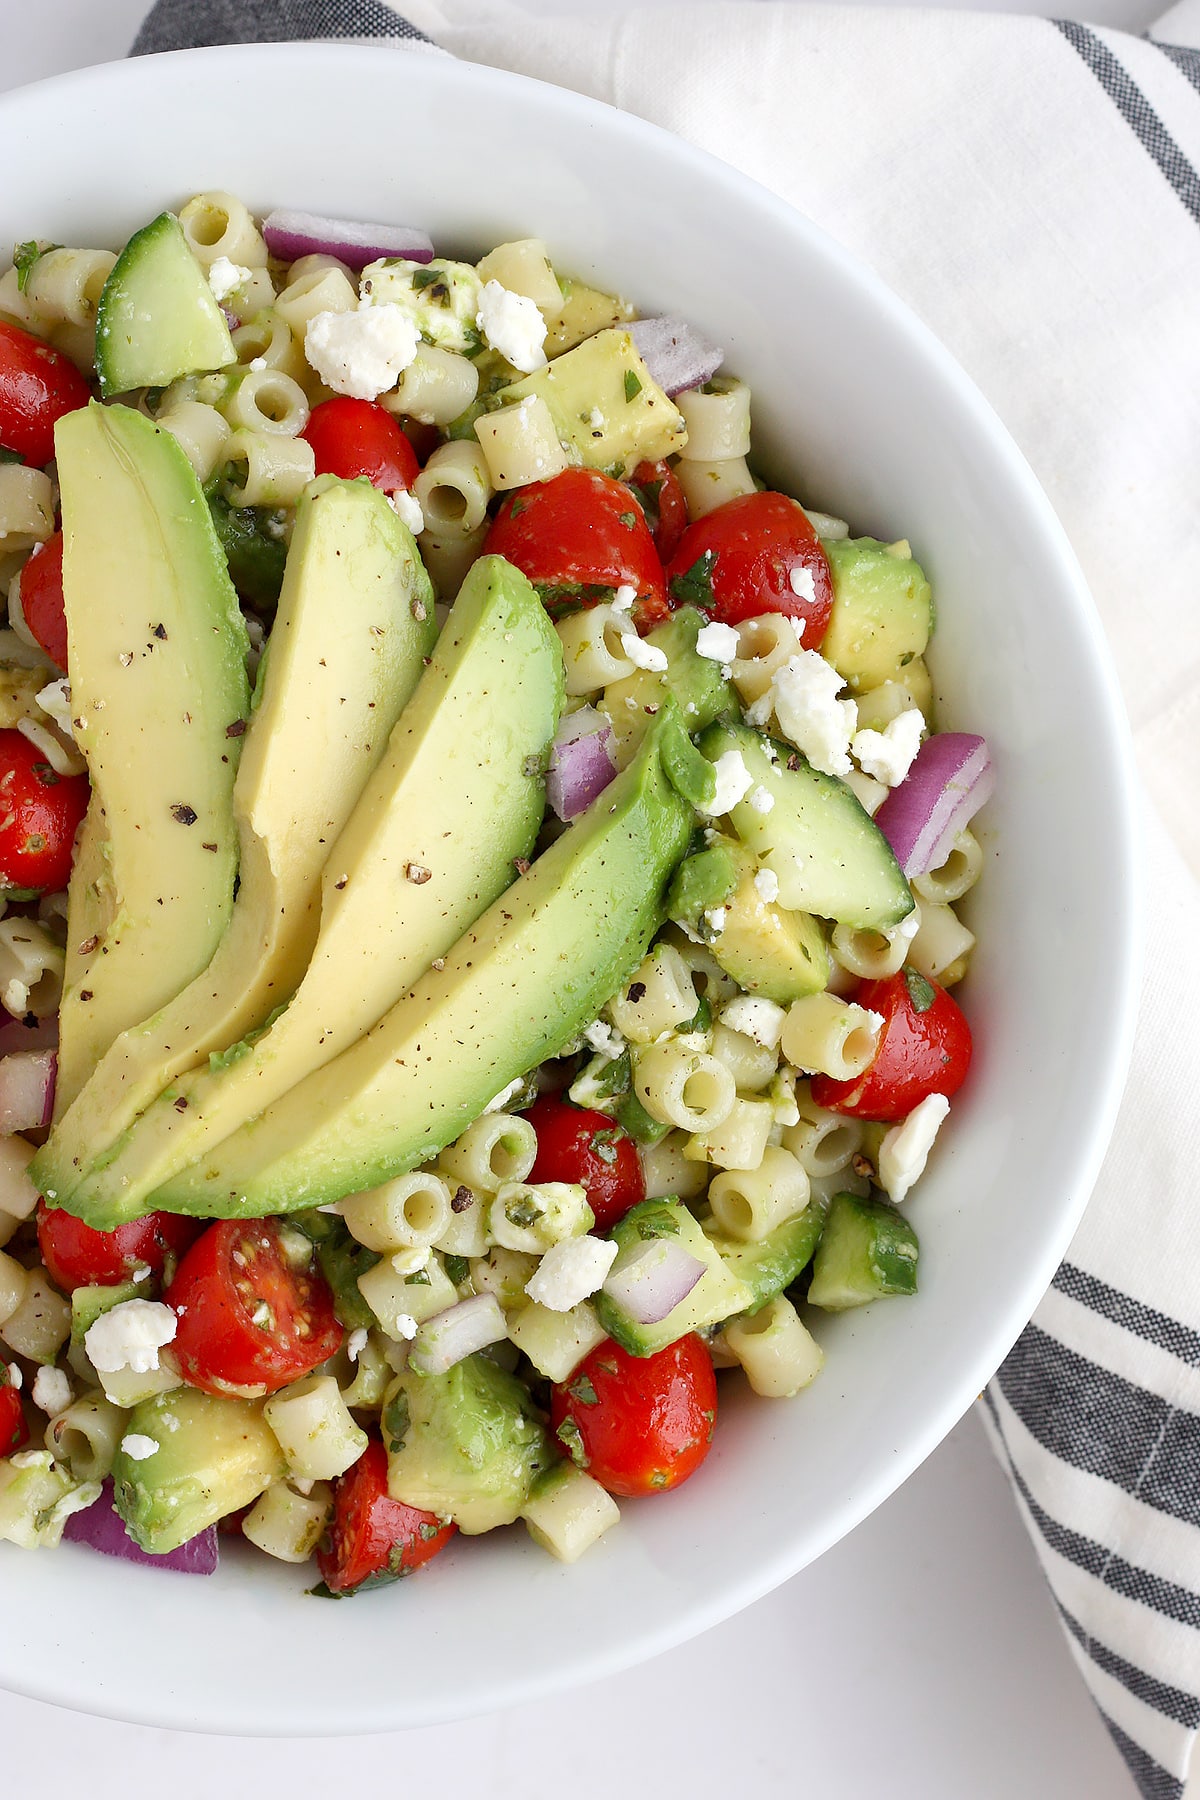 Avocado pasta salad topped with fresh cracked black pepper in a white serving bowl.